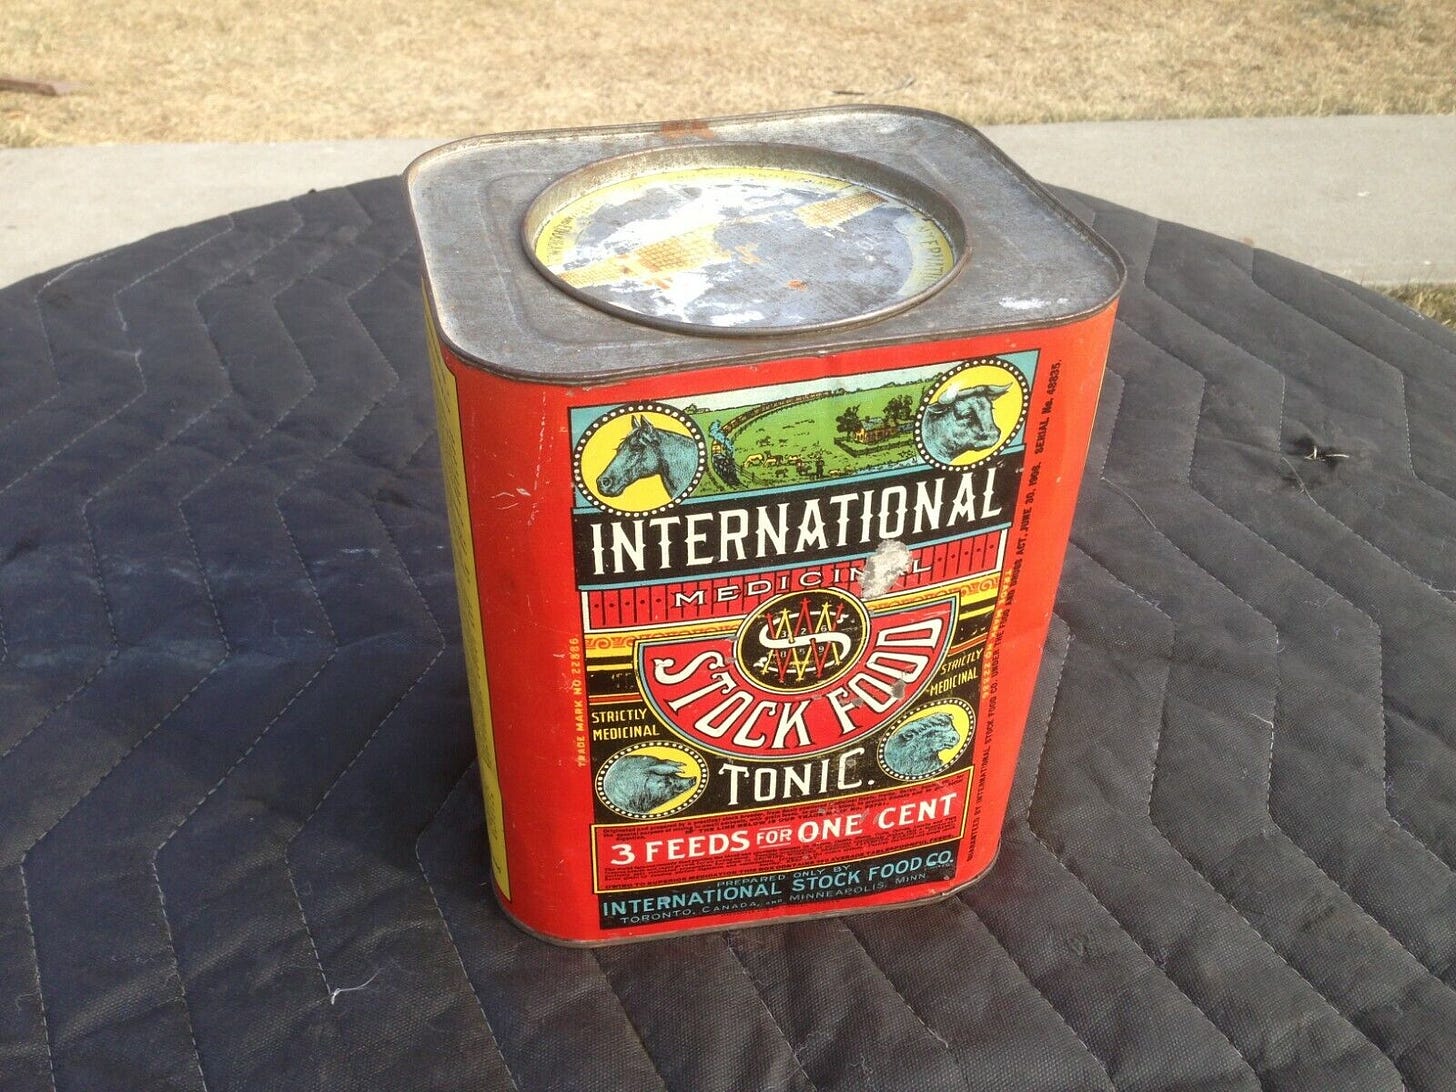 cannister that held International Stock Food Co product